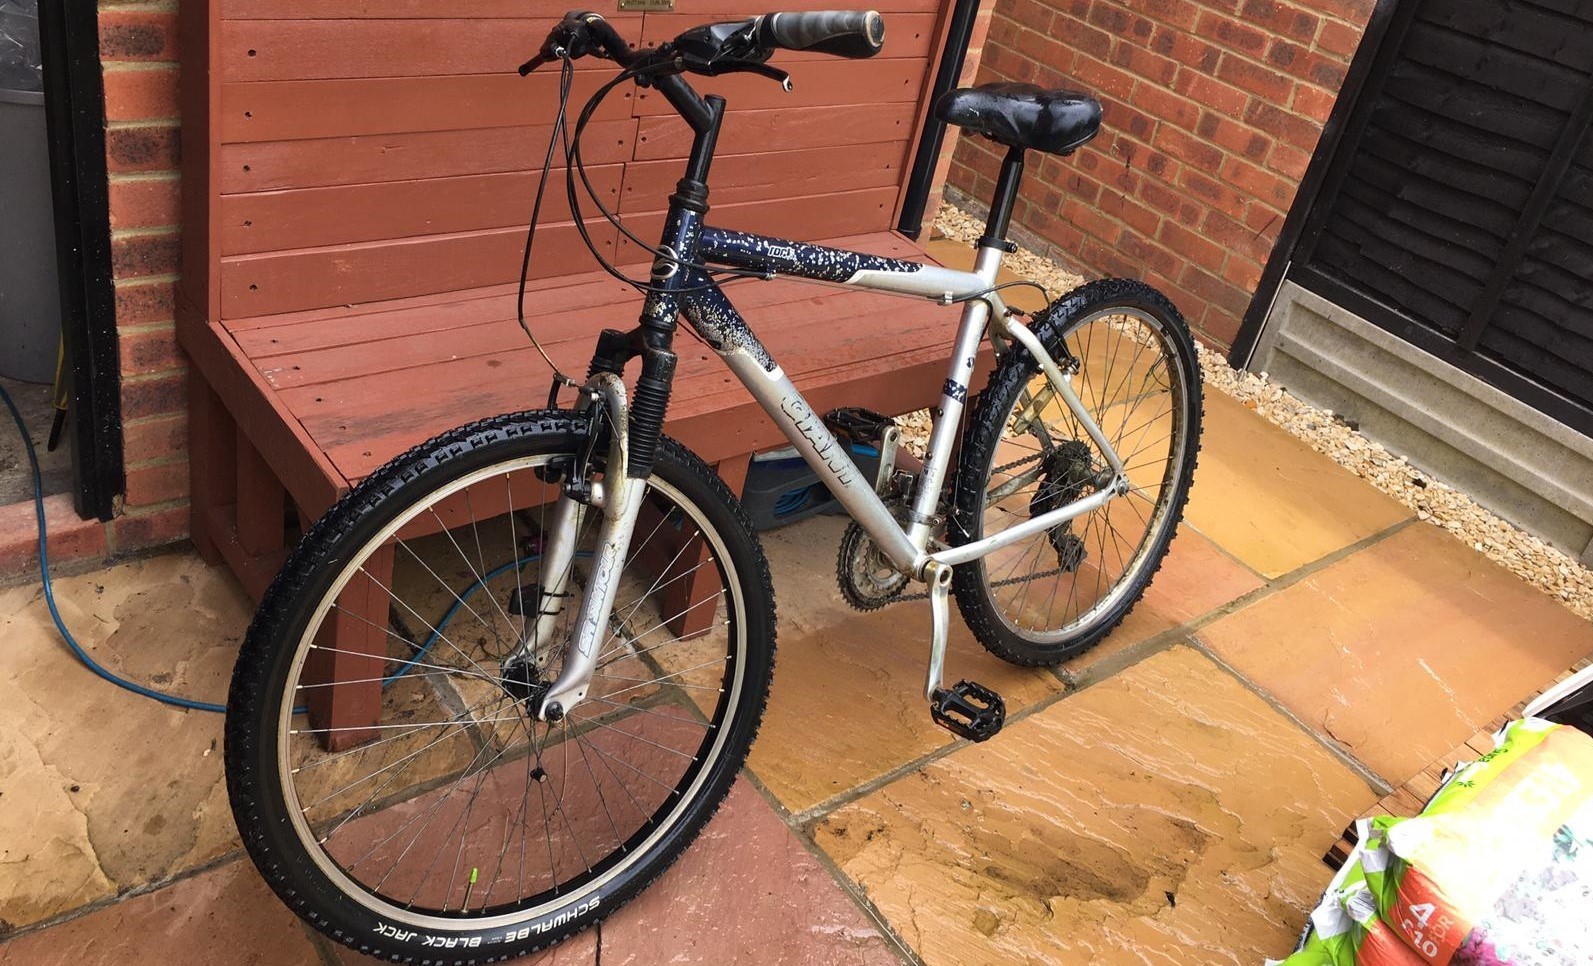 The bike was found in Aylesbury on May 23 